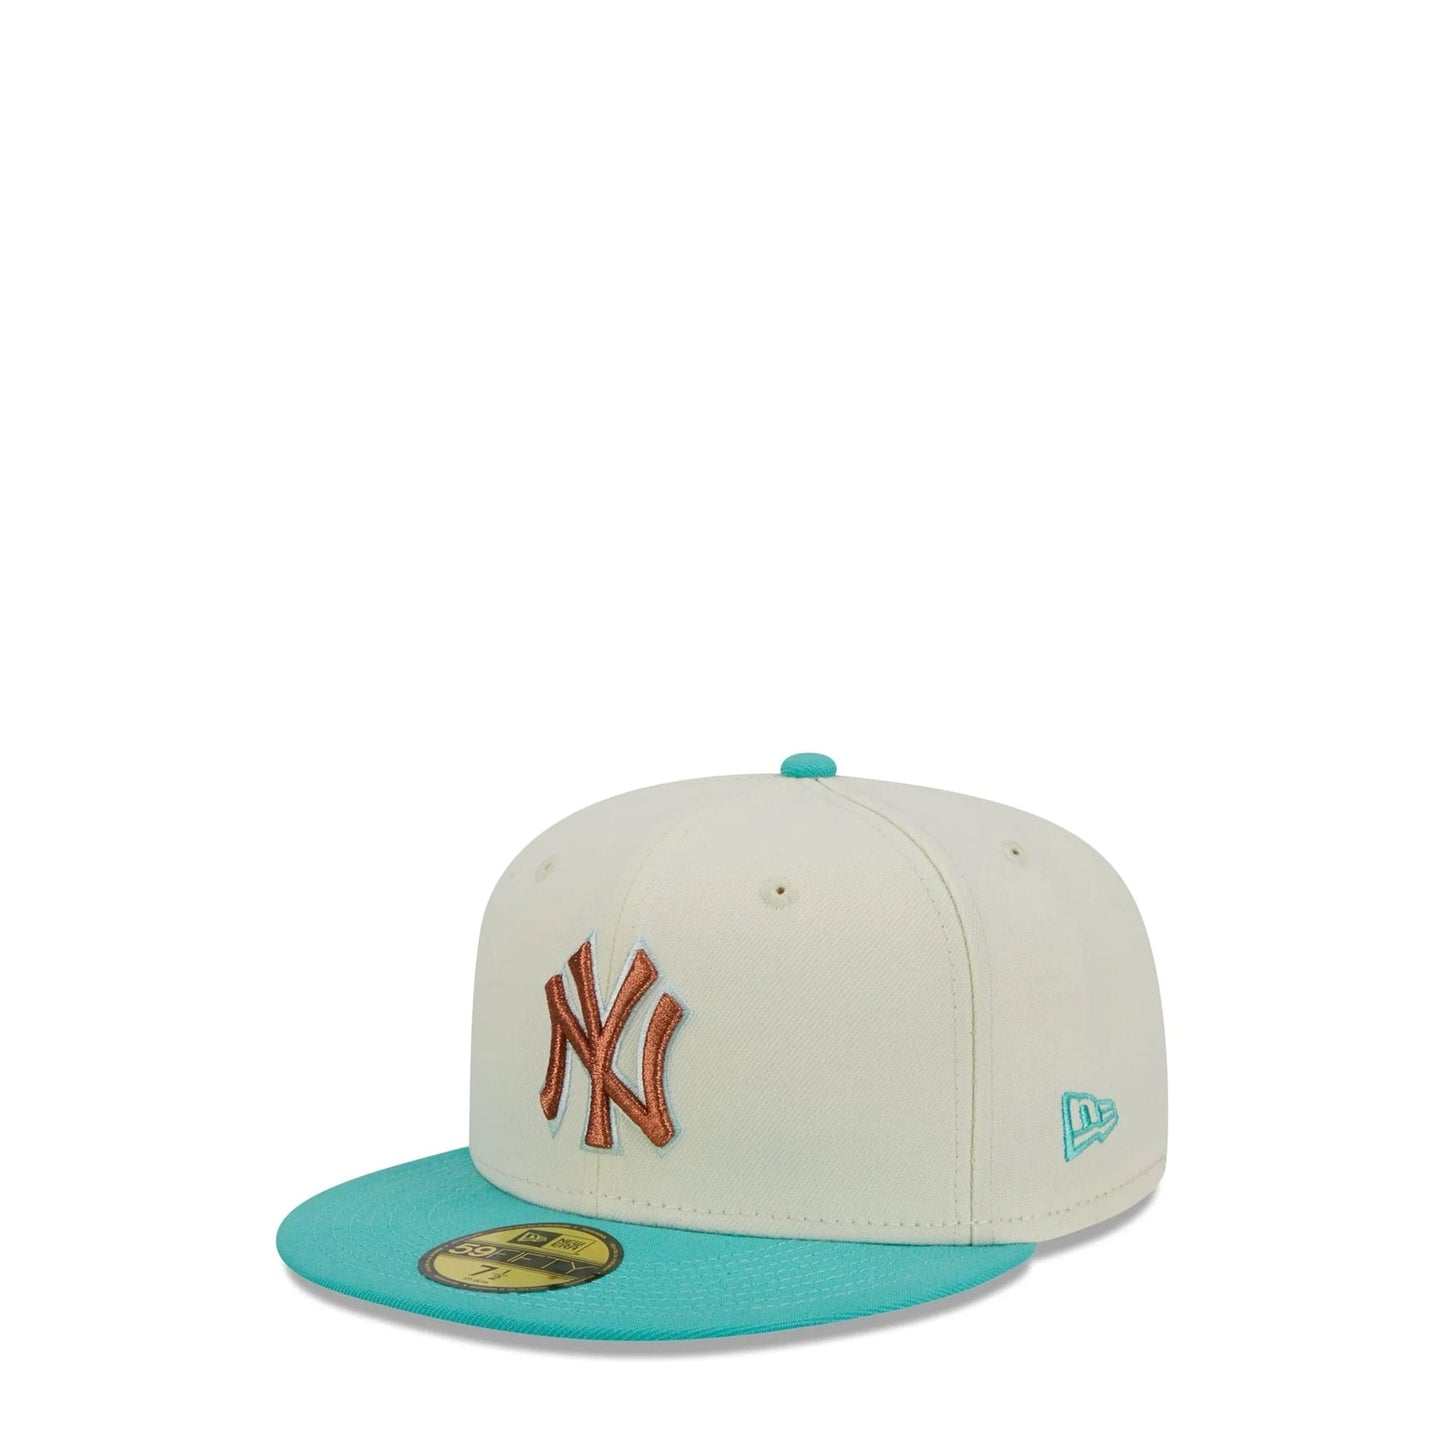 New Era Headwear 59FIFTY NEW YORK YANKEES CITY ICON FITTED CAP